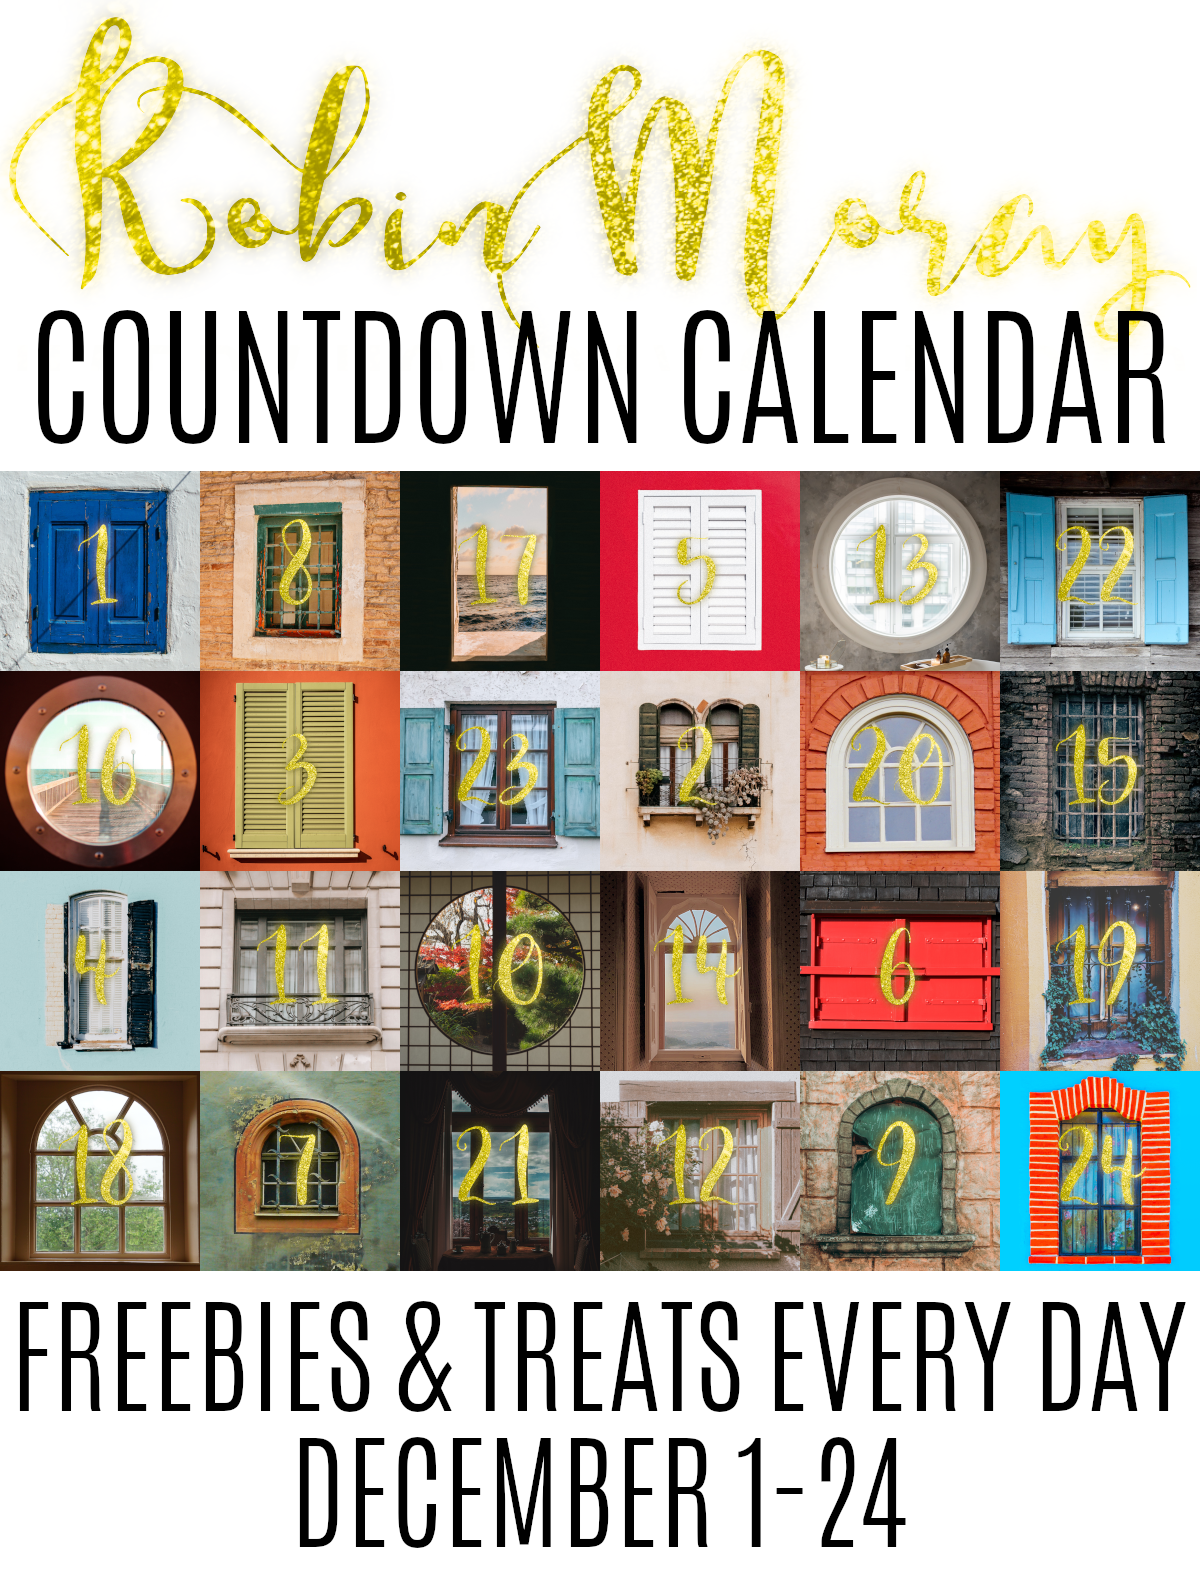 Robin Moray Countdown Calendar. Freebies and Treats every day December 1-24. Image of a grid of 24 different photos of windows, each with a number superimposed on the top. The numbers are in a random order.